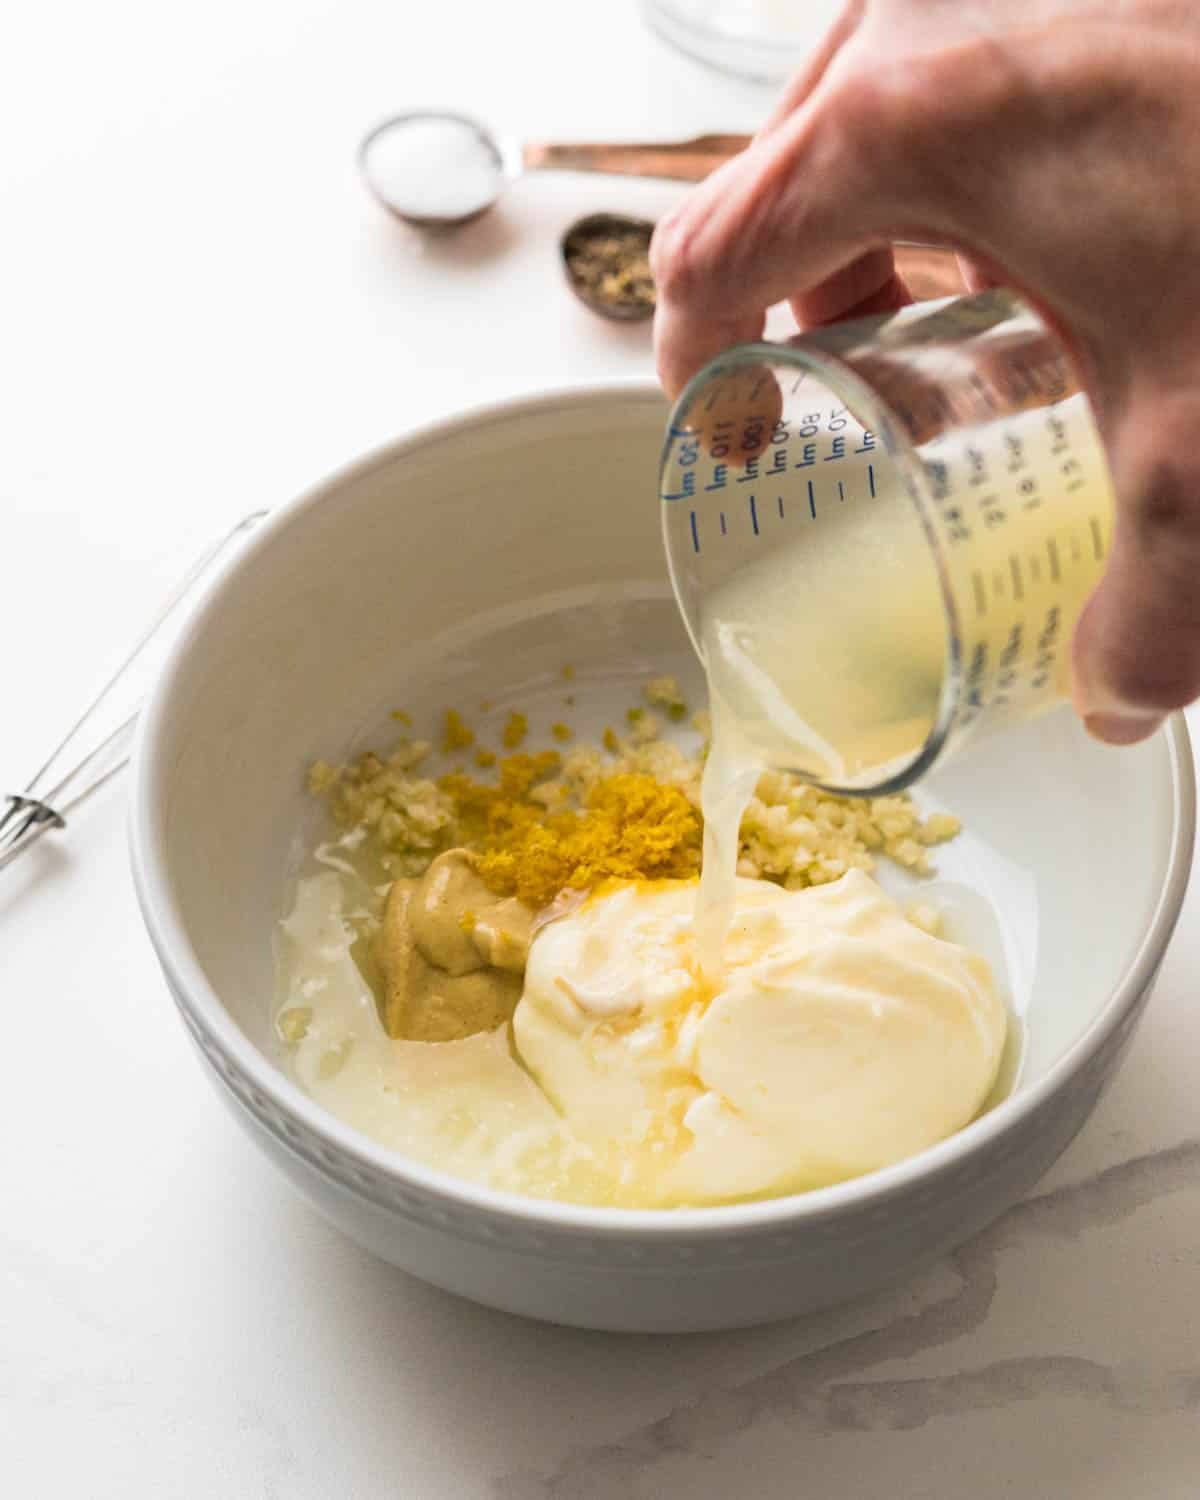 Combining lemon juice with garlic, dijon, lemon zest and mayonnaise in a small bowl.